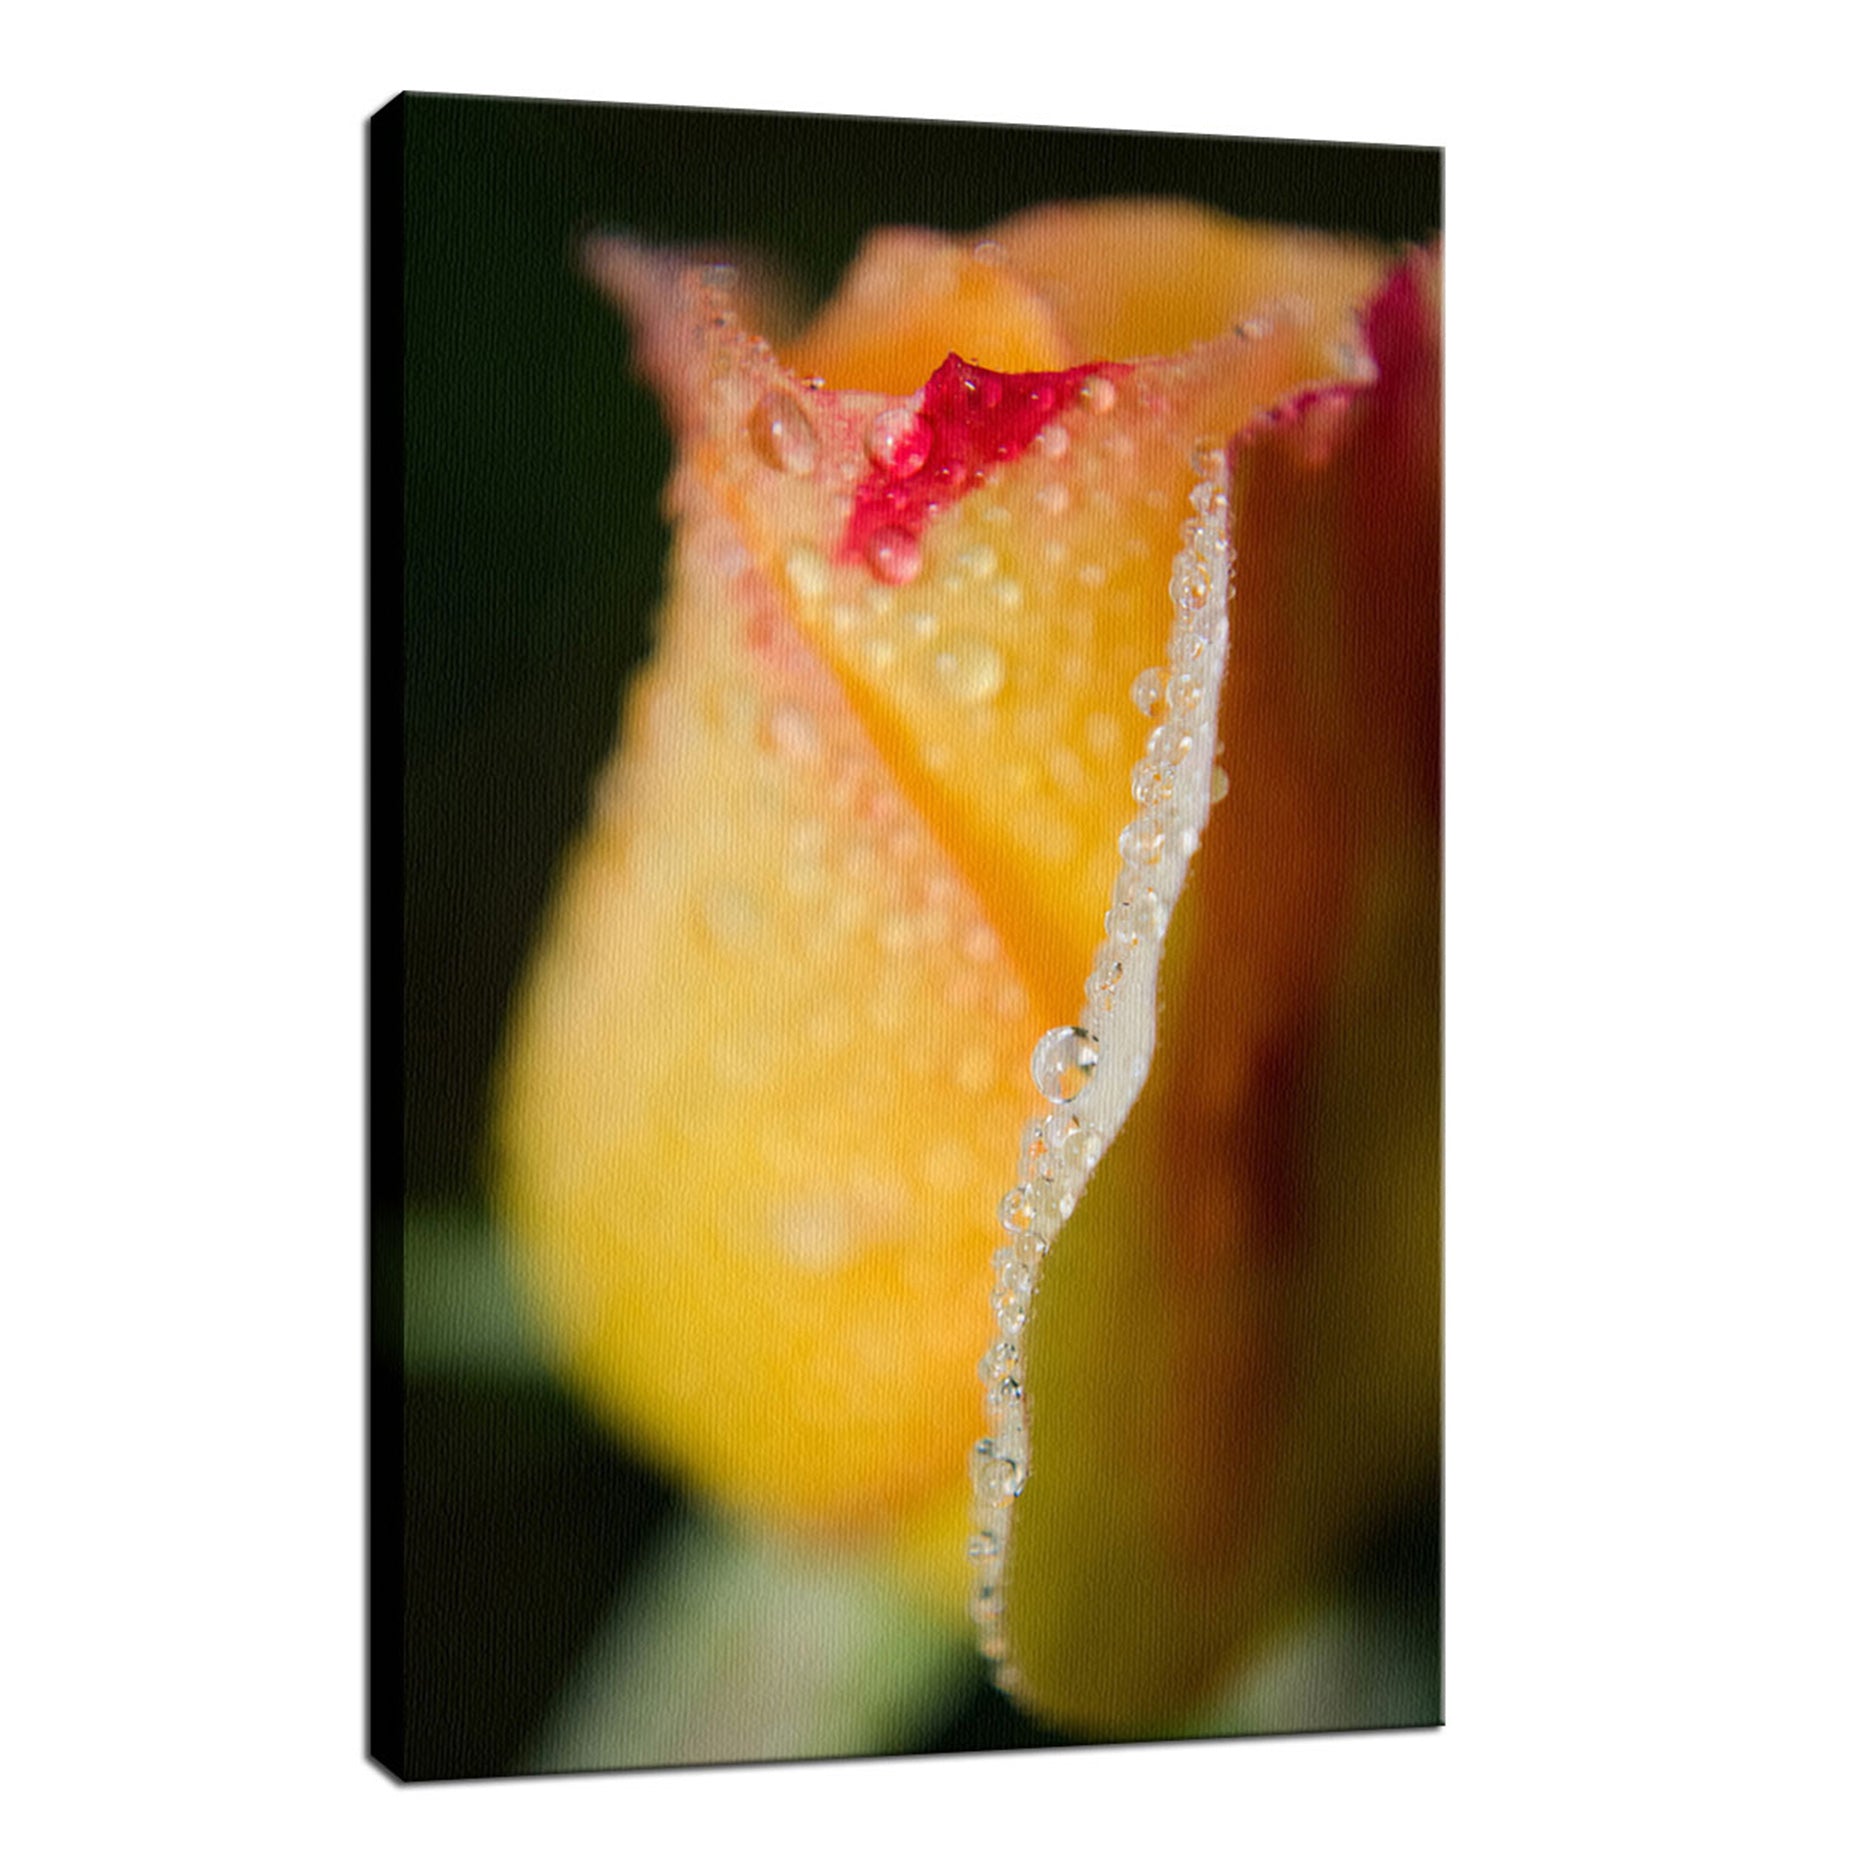 Dew on Yellow Rose Nature / Floral Photo Fine Art Canvas Wall Art Prints  - PIPAFINEART